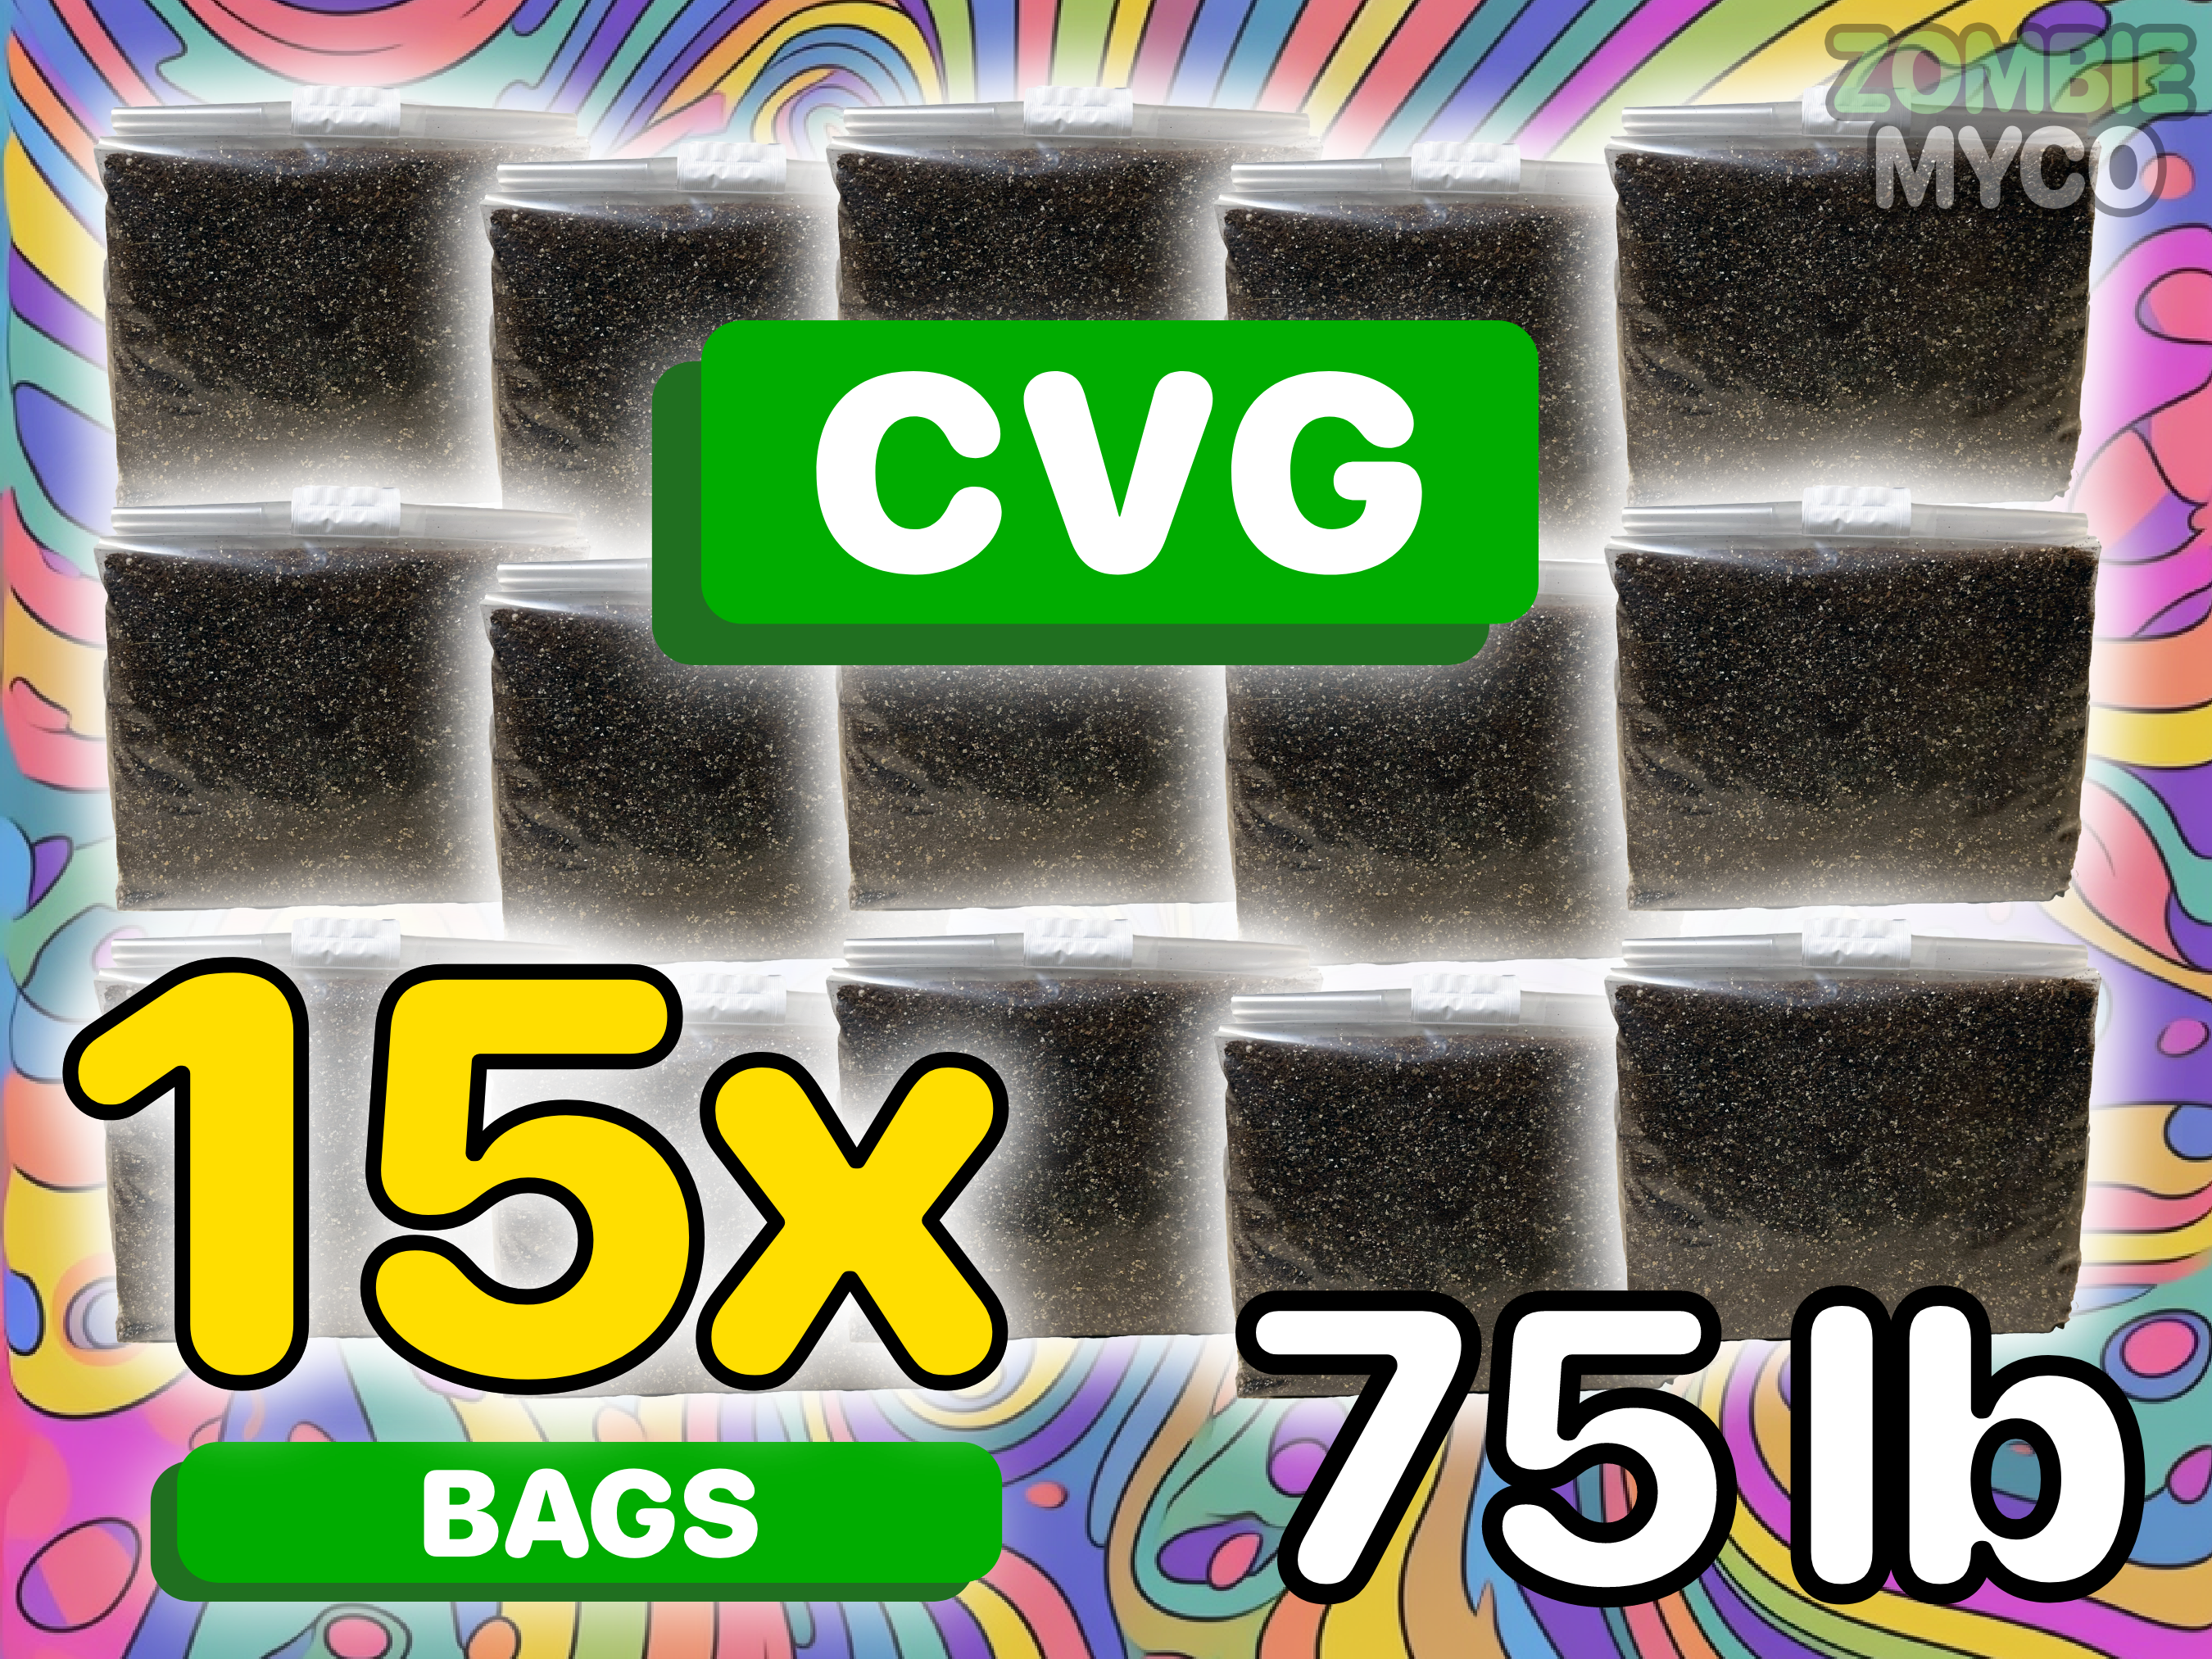 a picture of 15x bags of CVG (75lb)